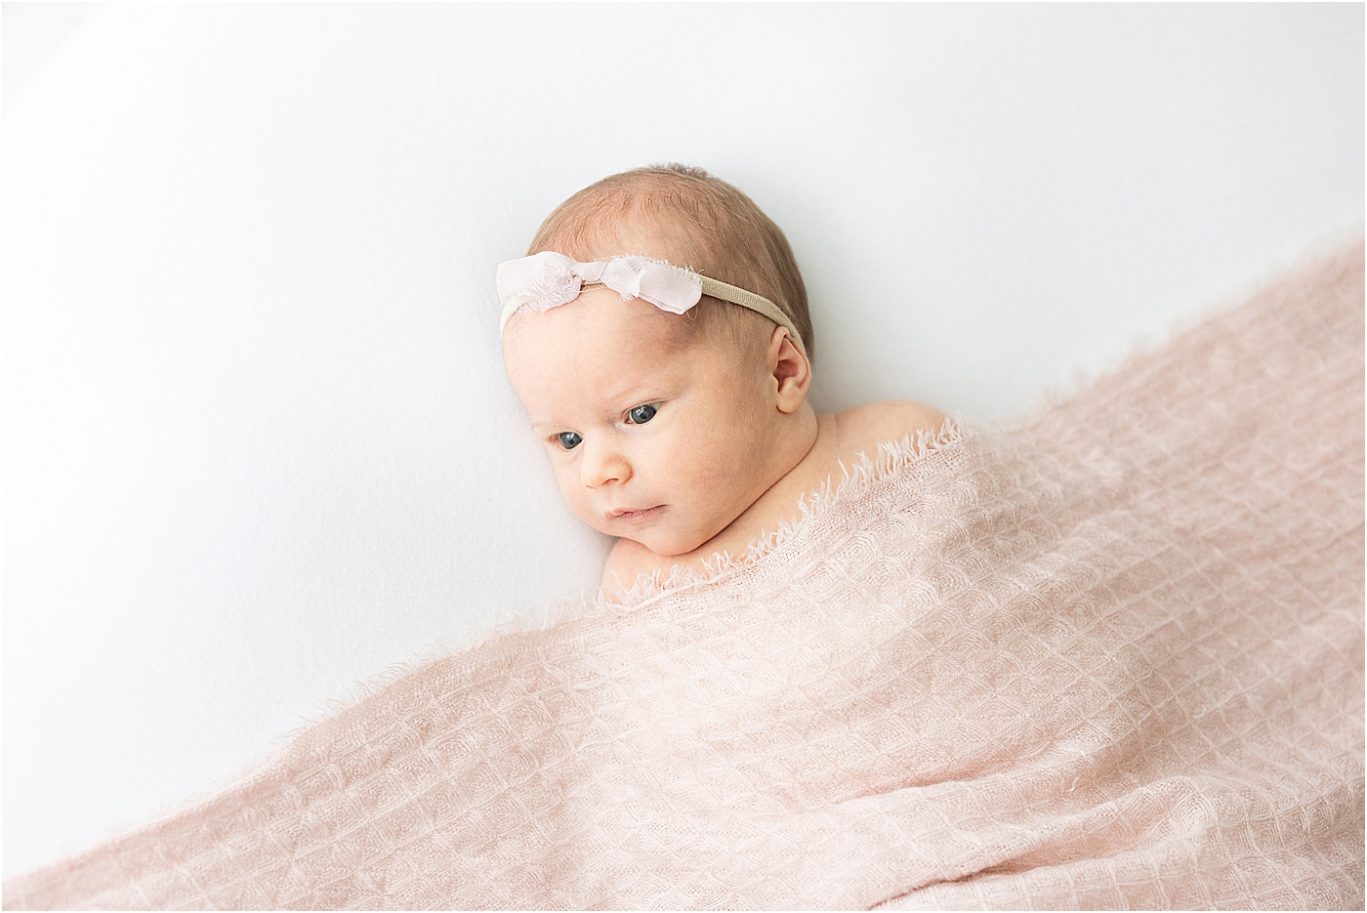 Newborn session for baby girl. Photo by Lindsay Konopa Photography.